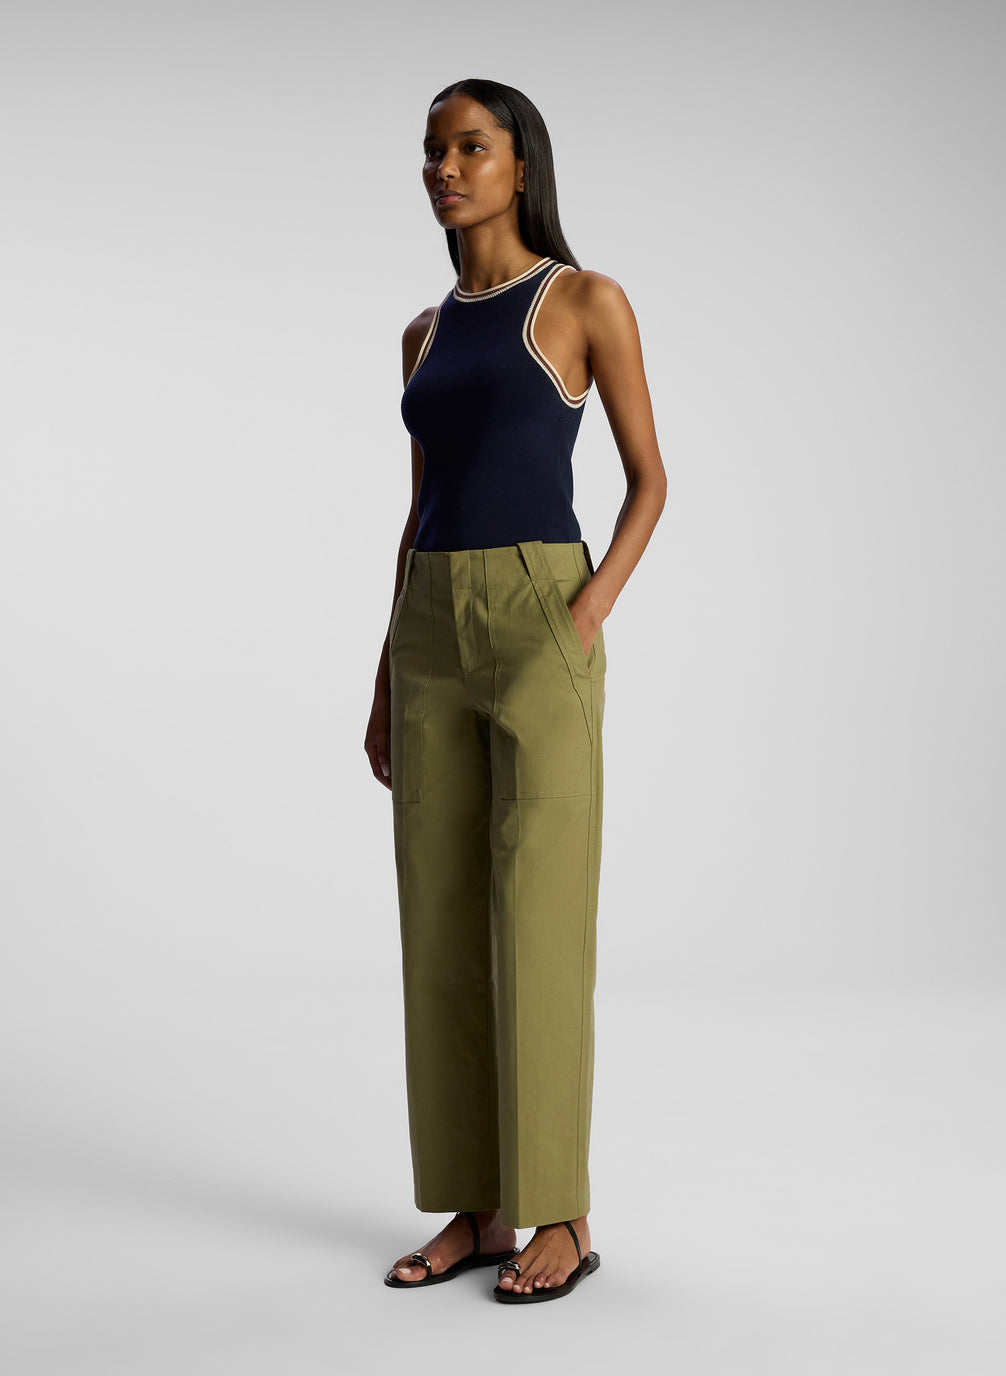 side view of woman wearing navy blue tank top and olive green pants